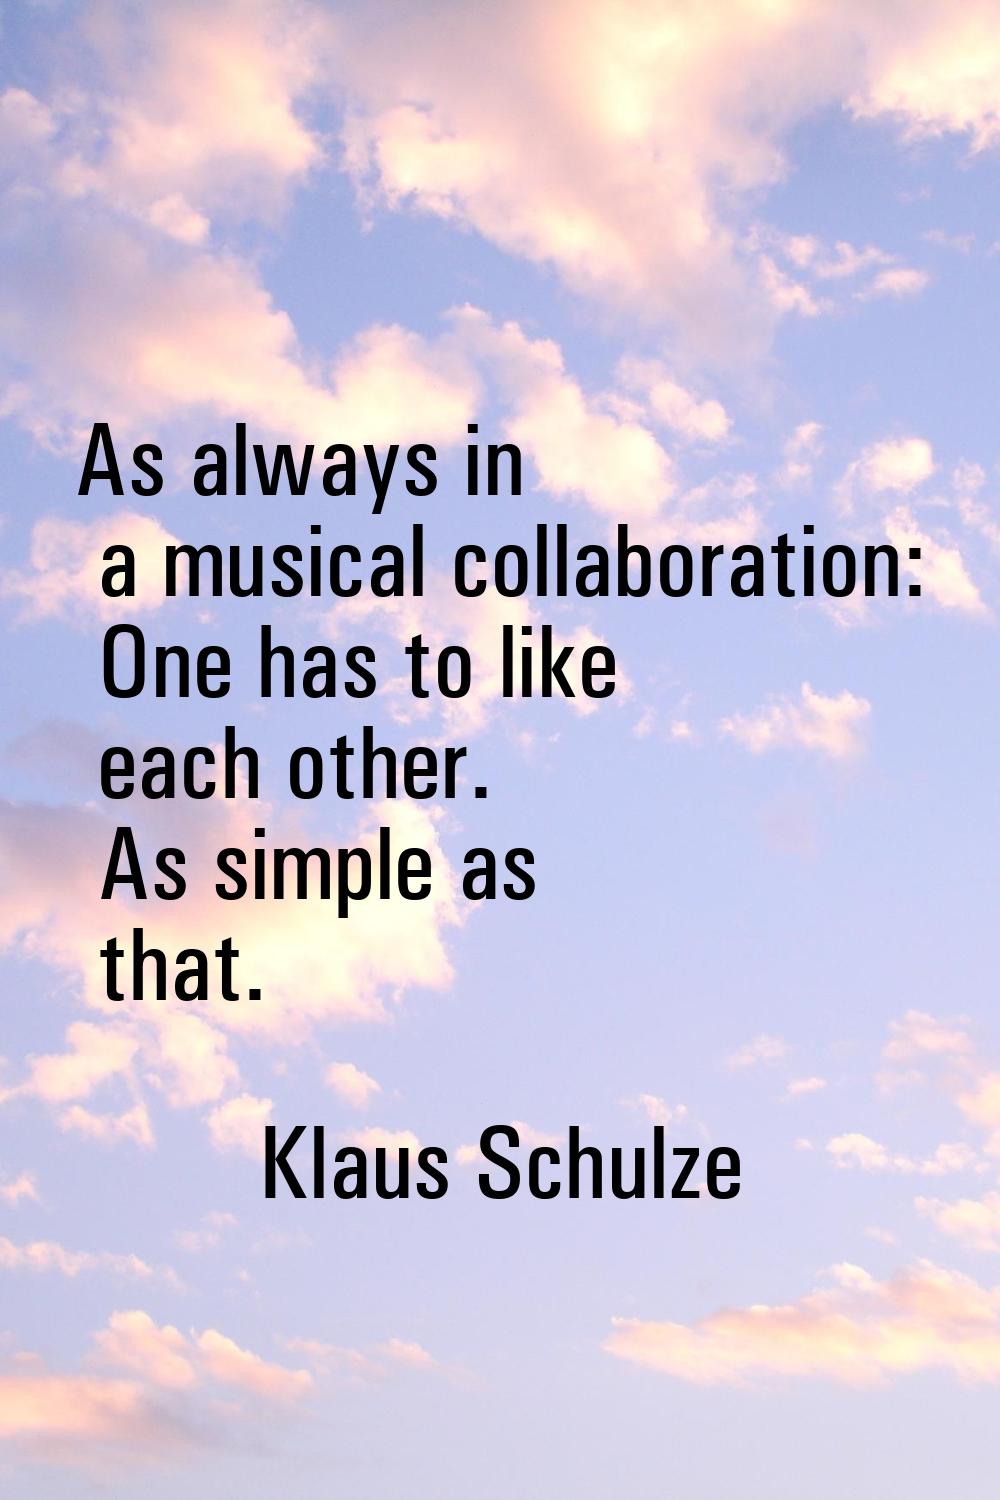 As always in a musical collaboration: One has to like each other. As simple as that.